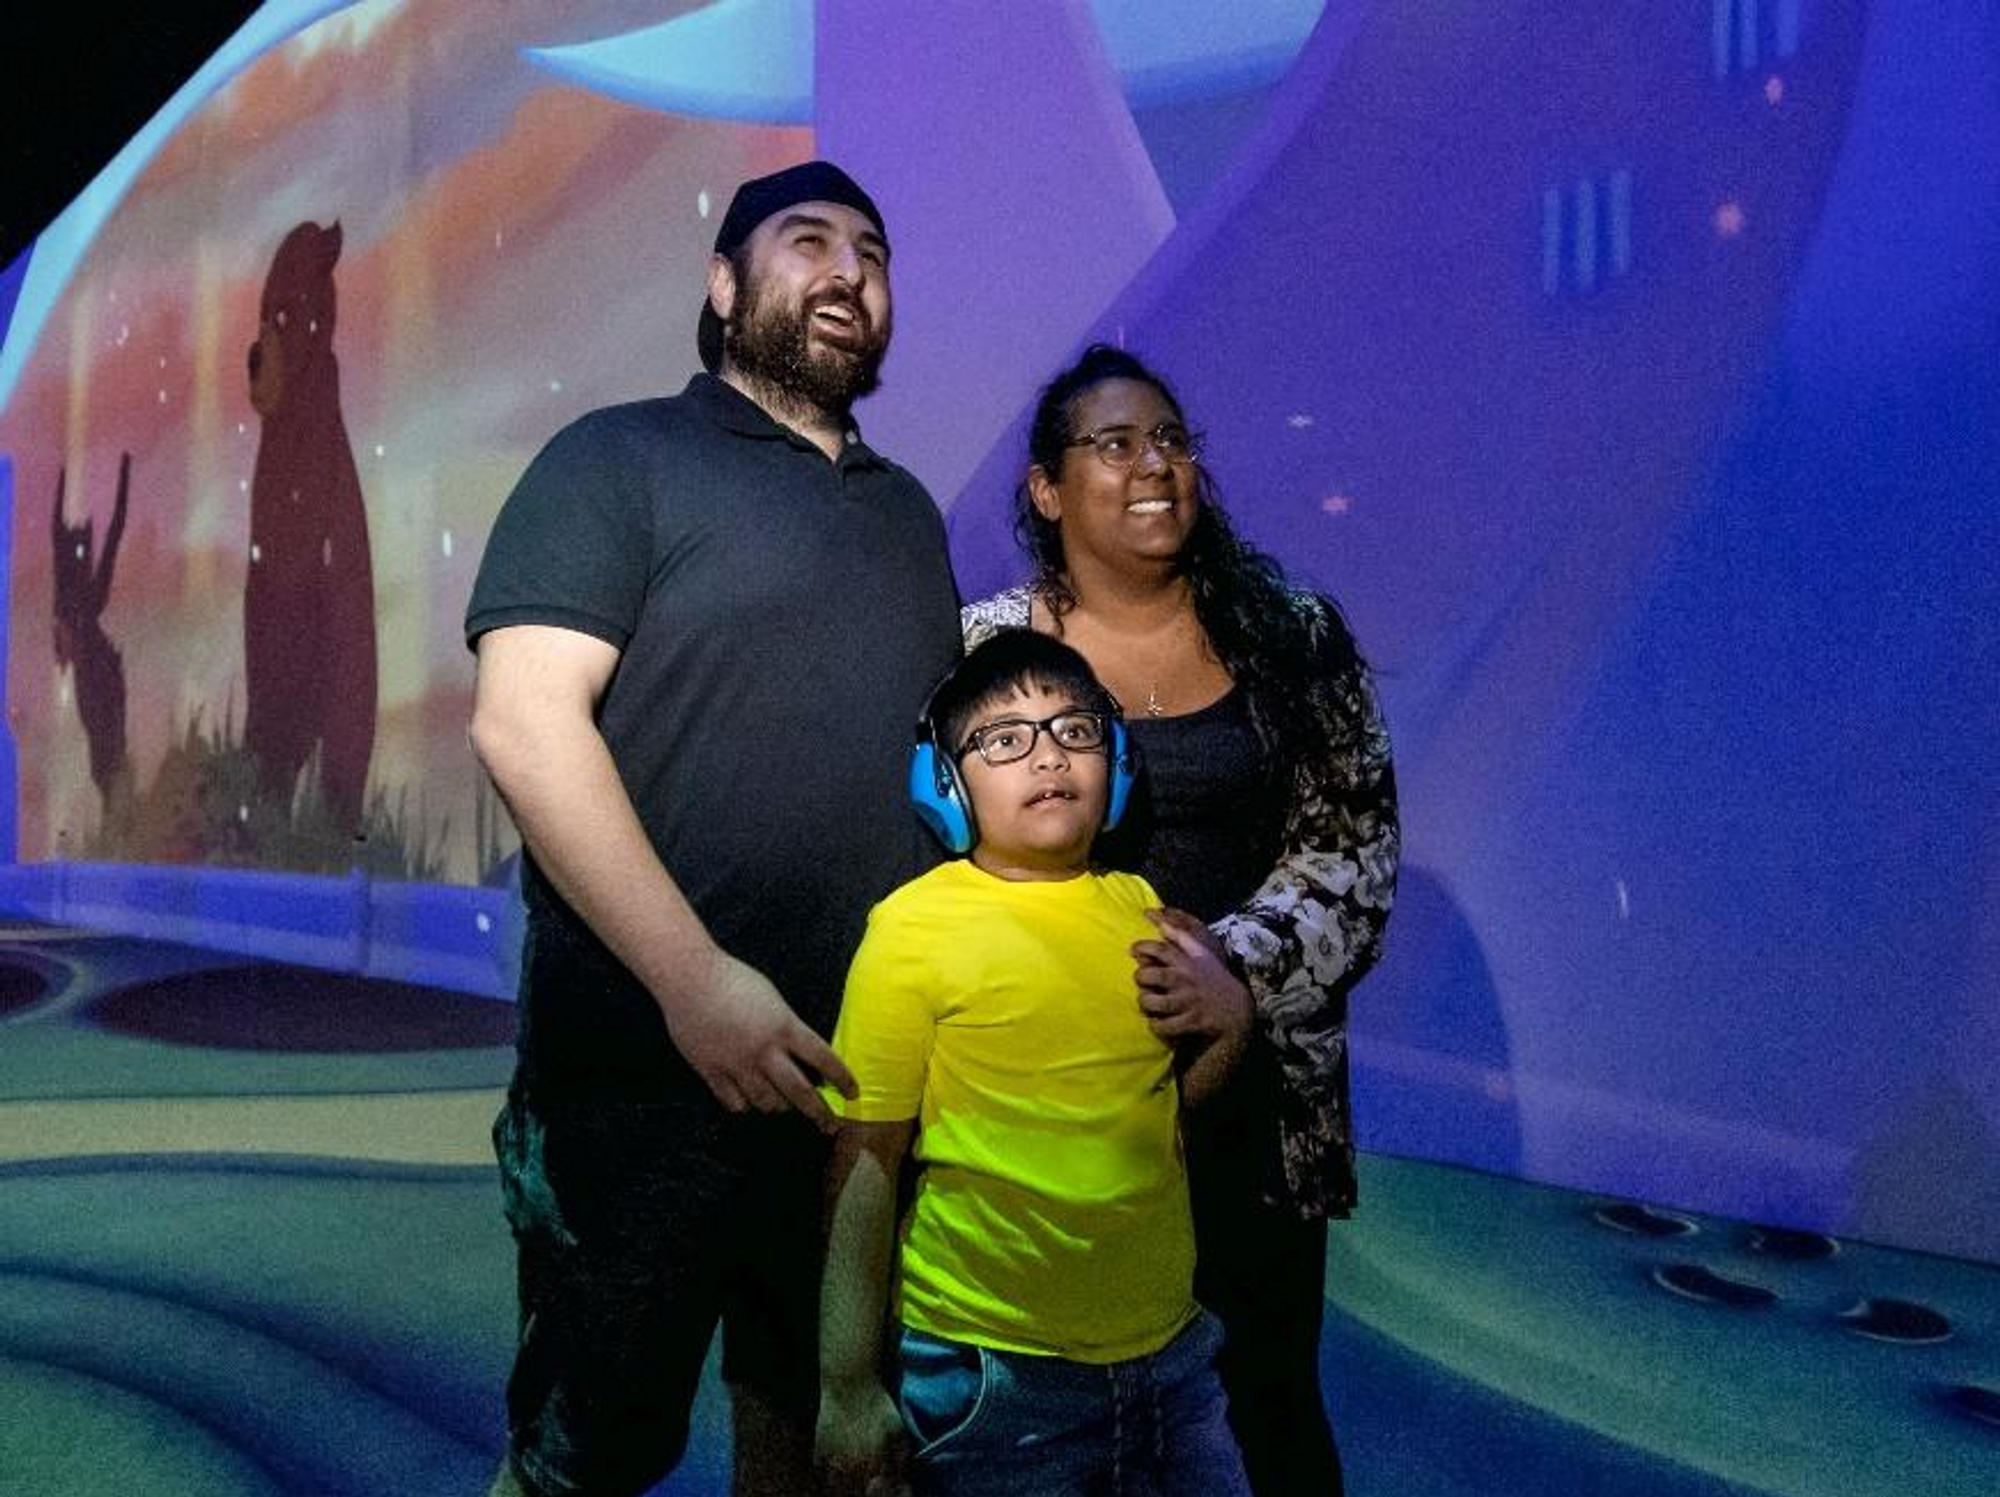 A family enjoys a Disney Immersive Experience show together 